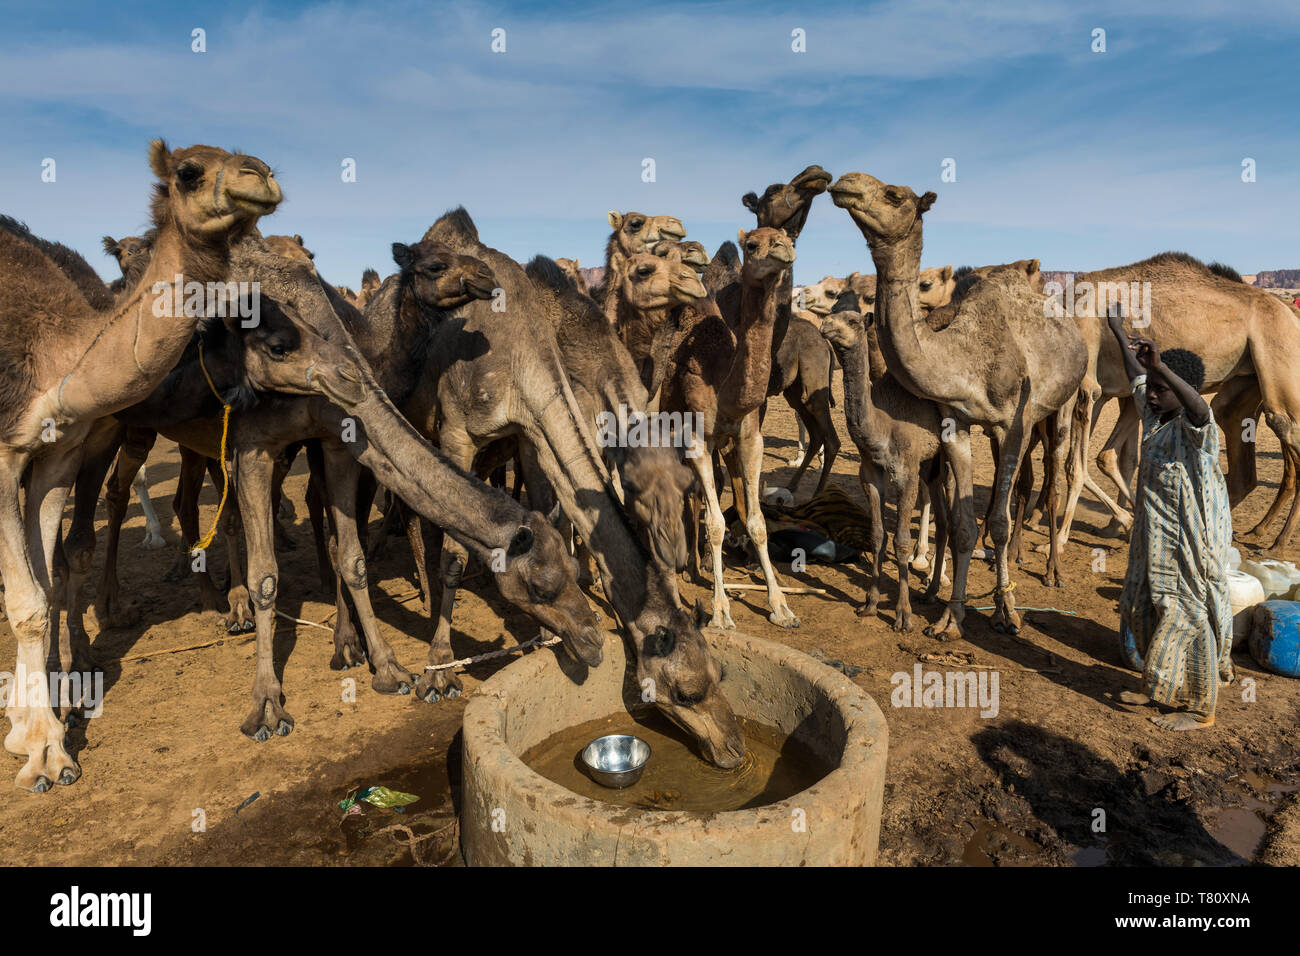 Camels at a water hole, Ennedi plateau, UNESCO World Heritage Site, Chad, Africa Stock Photo